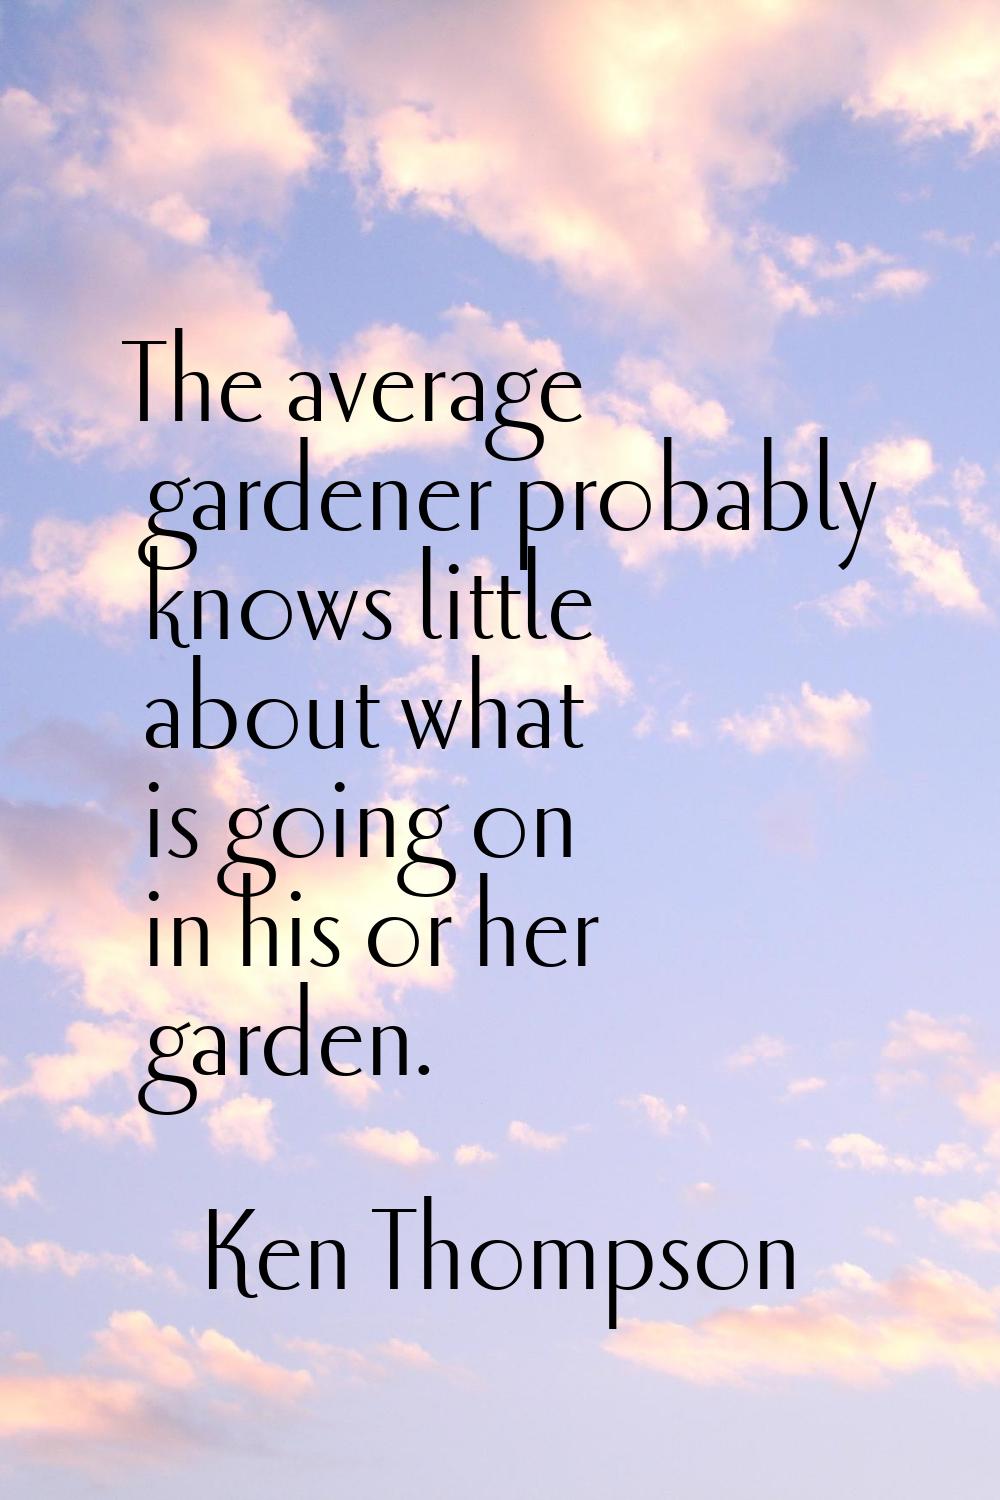 The average gardener probably knows little about what is going on in his or her garden.